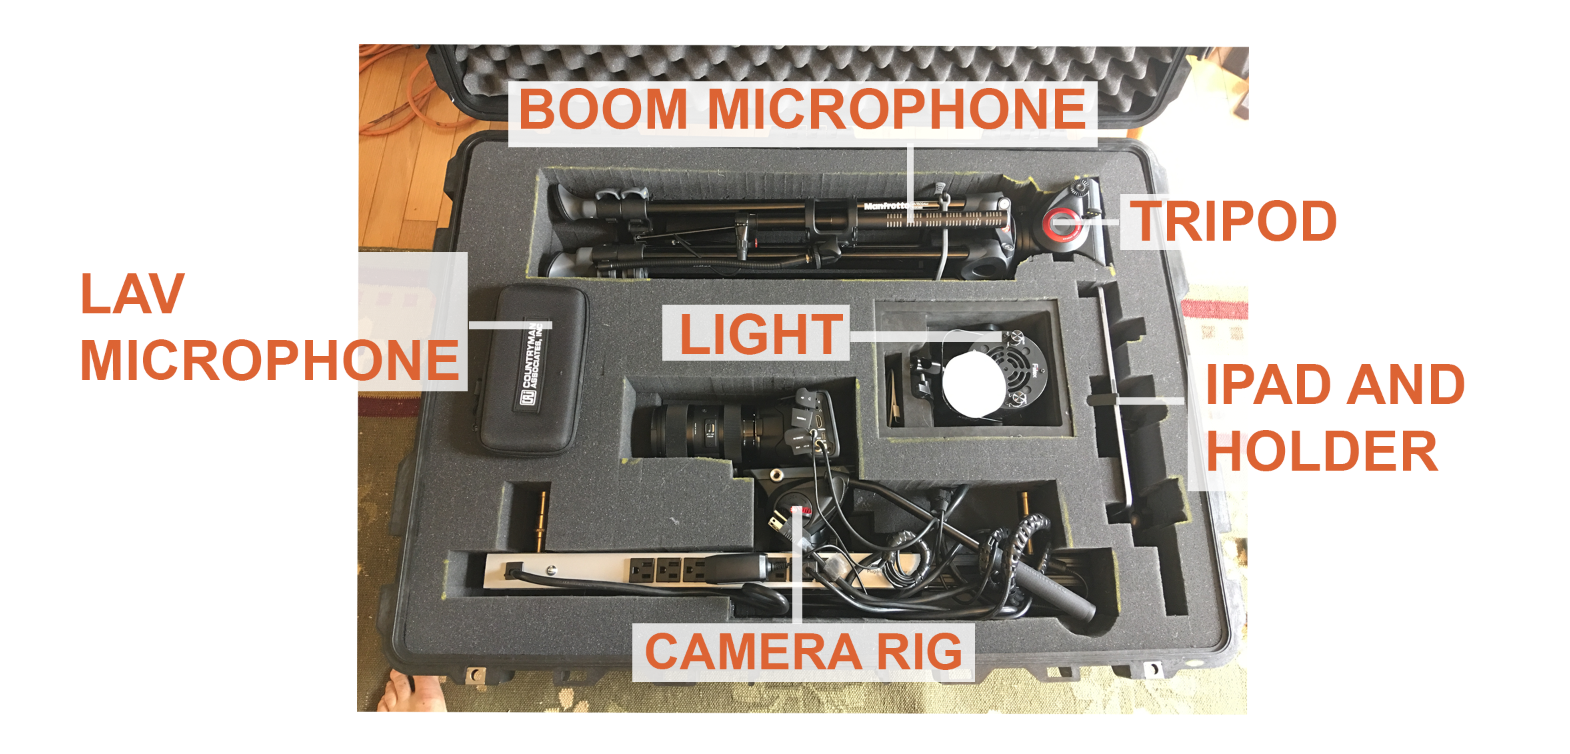 A diagram of an user-friendly camera kit, which has a Boom Microphone, LAV Microphone, Tripod, Light, iPad holder, and Camera Rig